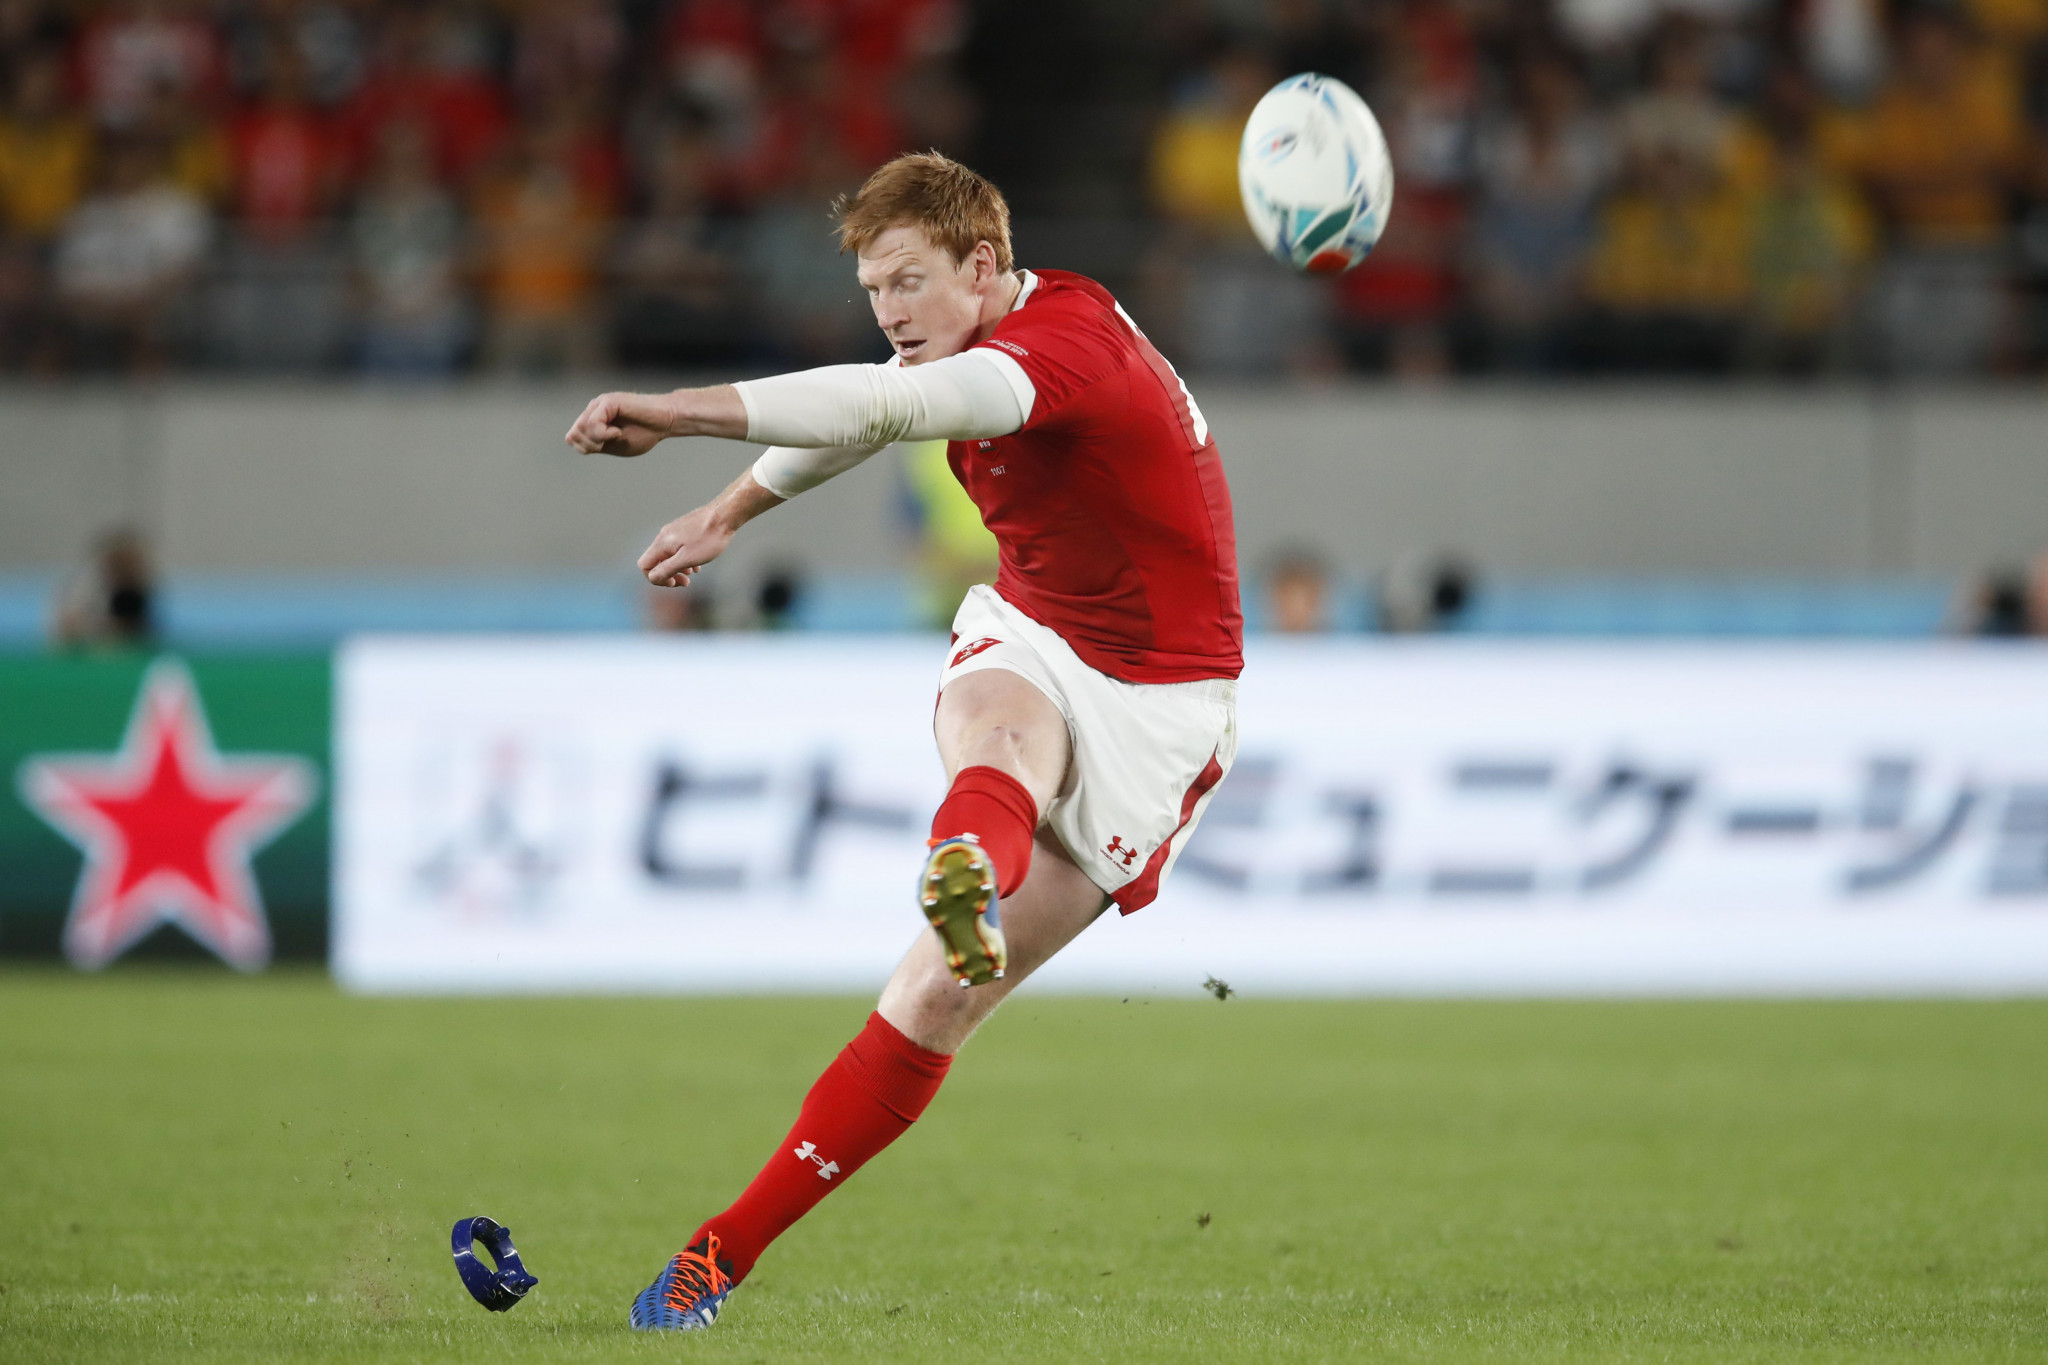 Rhys Patchell impressed with the boot and Wales hung on ©Getty Images